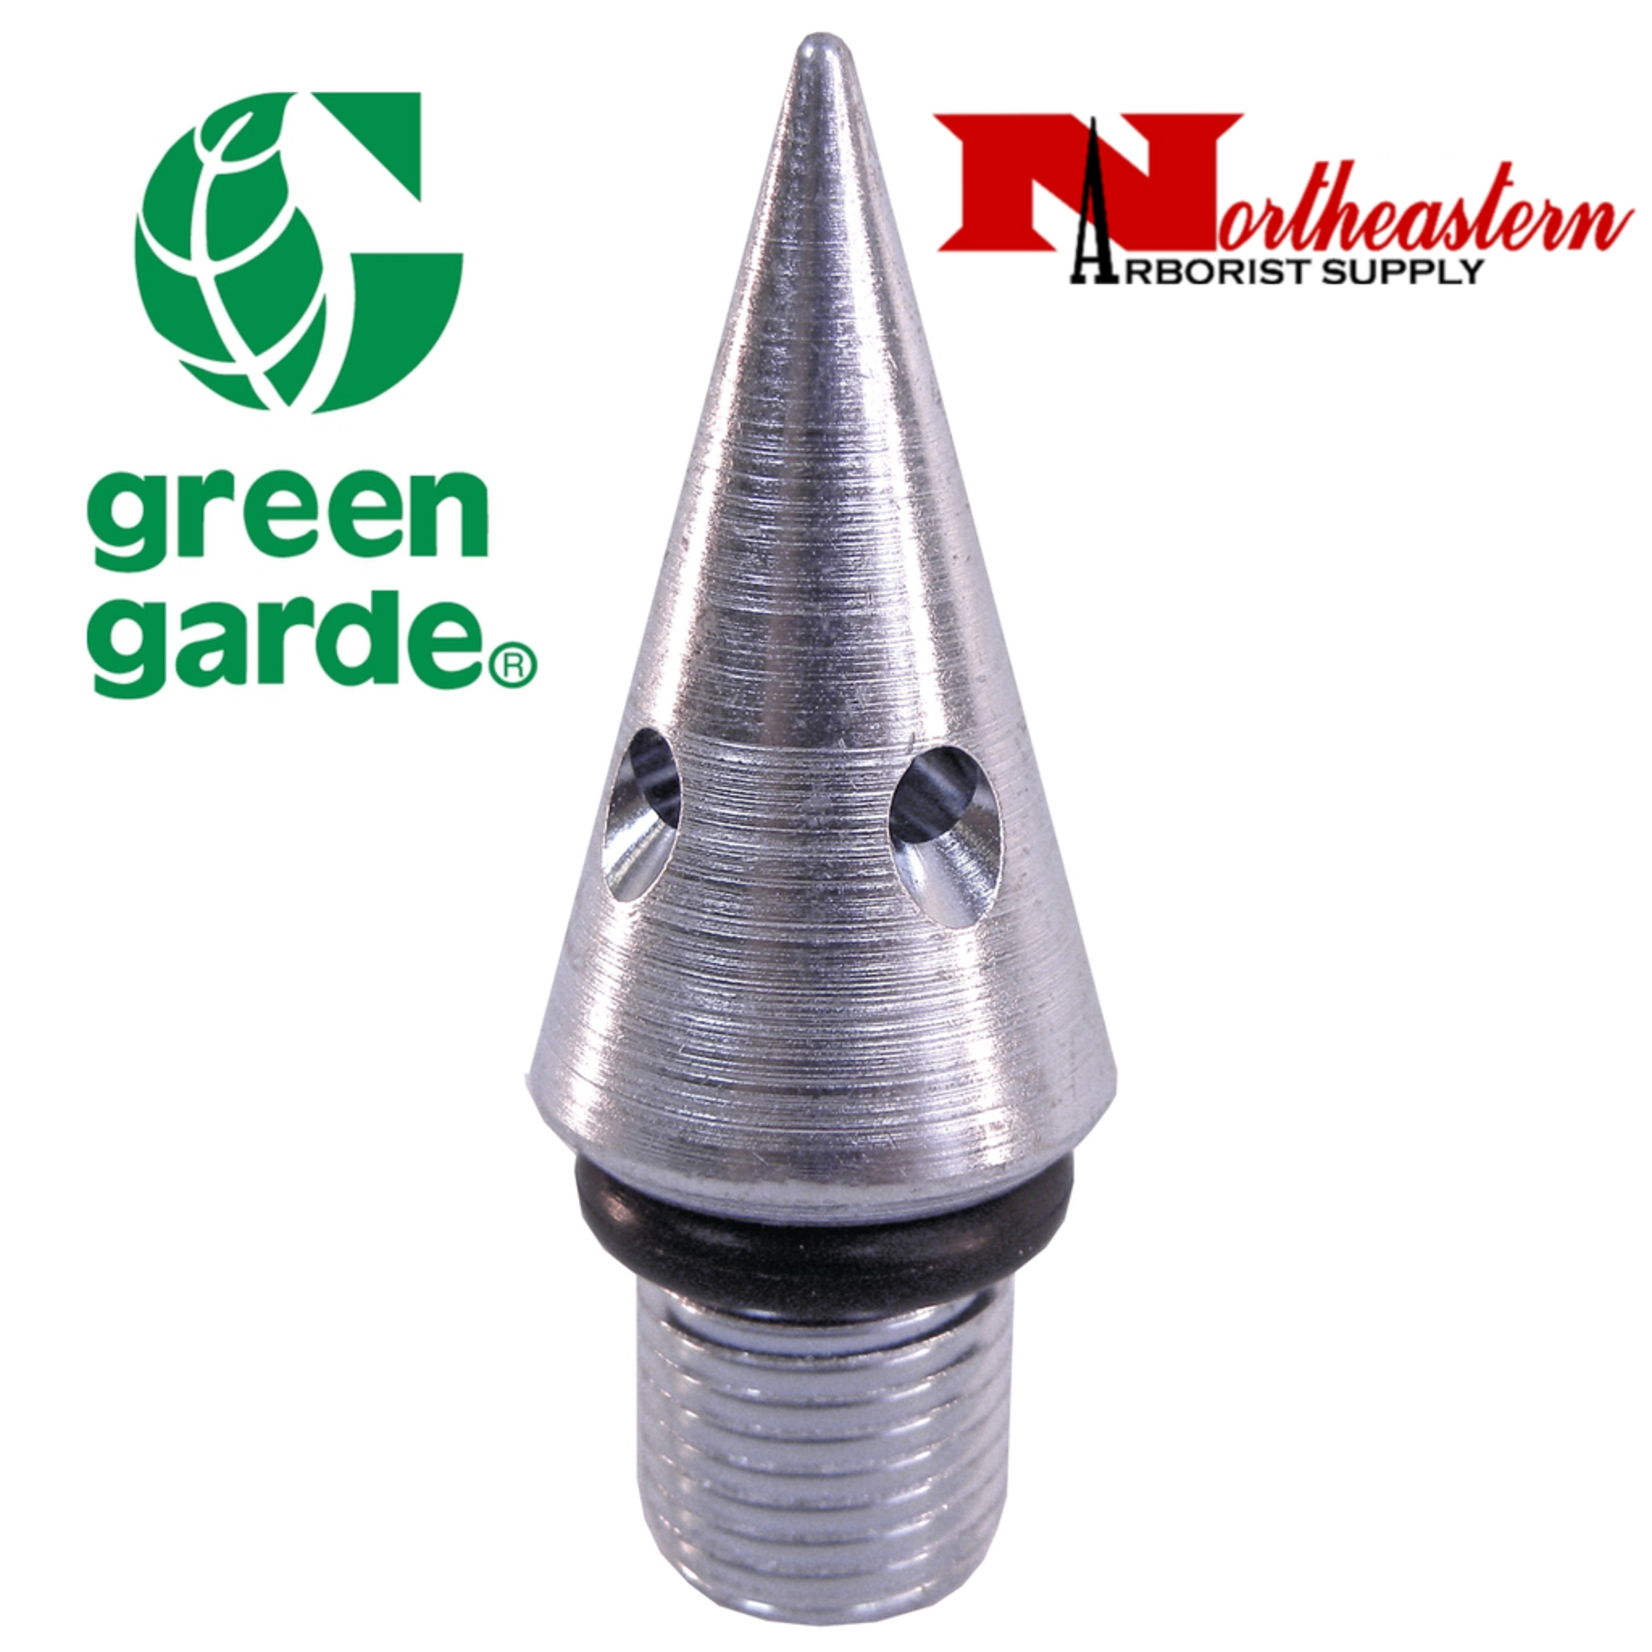 Green Garde® Surface Root Feeder 4 Hole Tip #38901